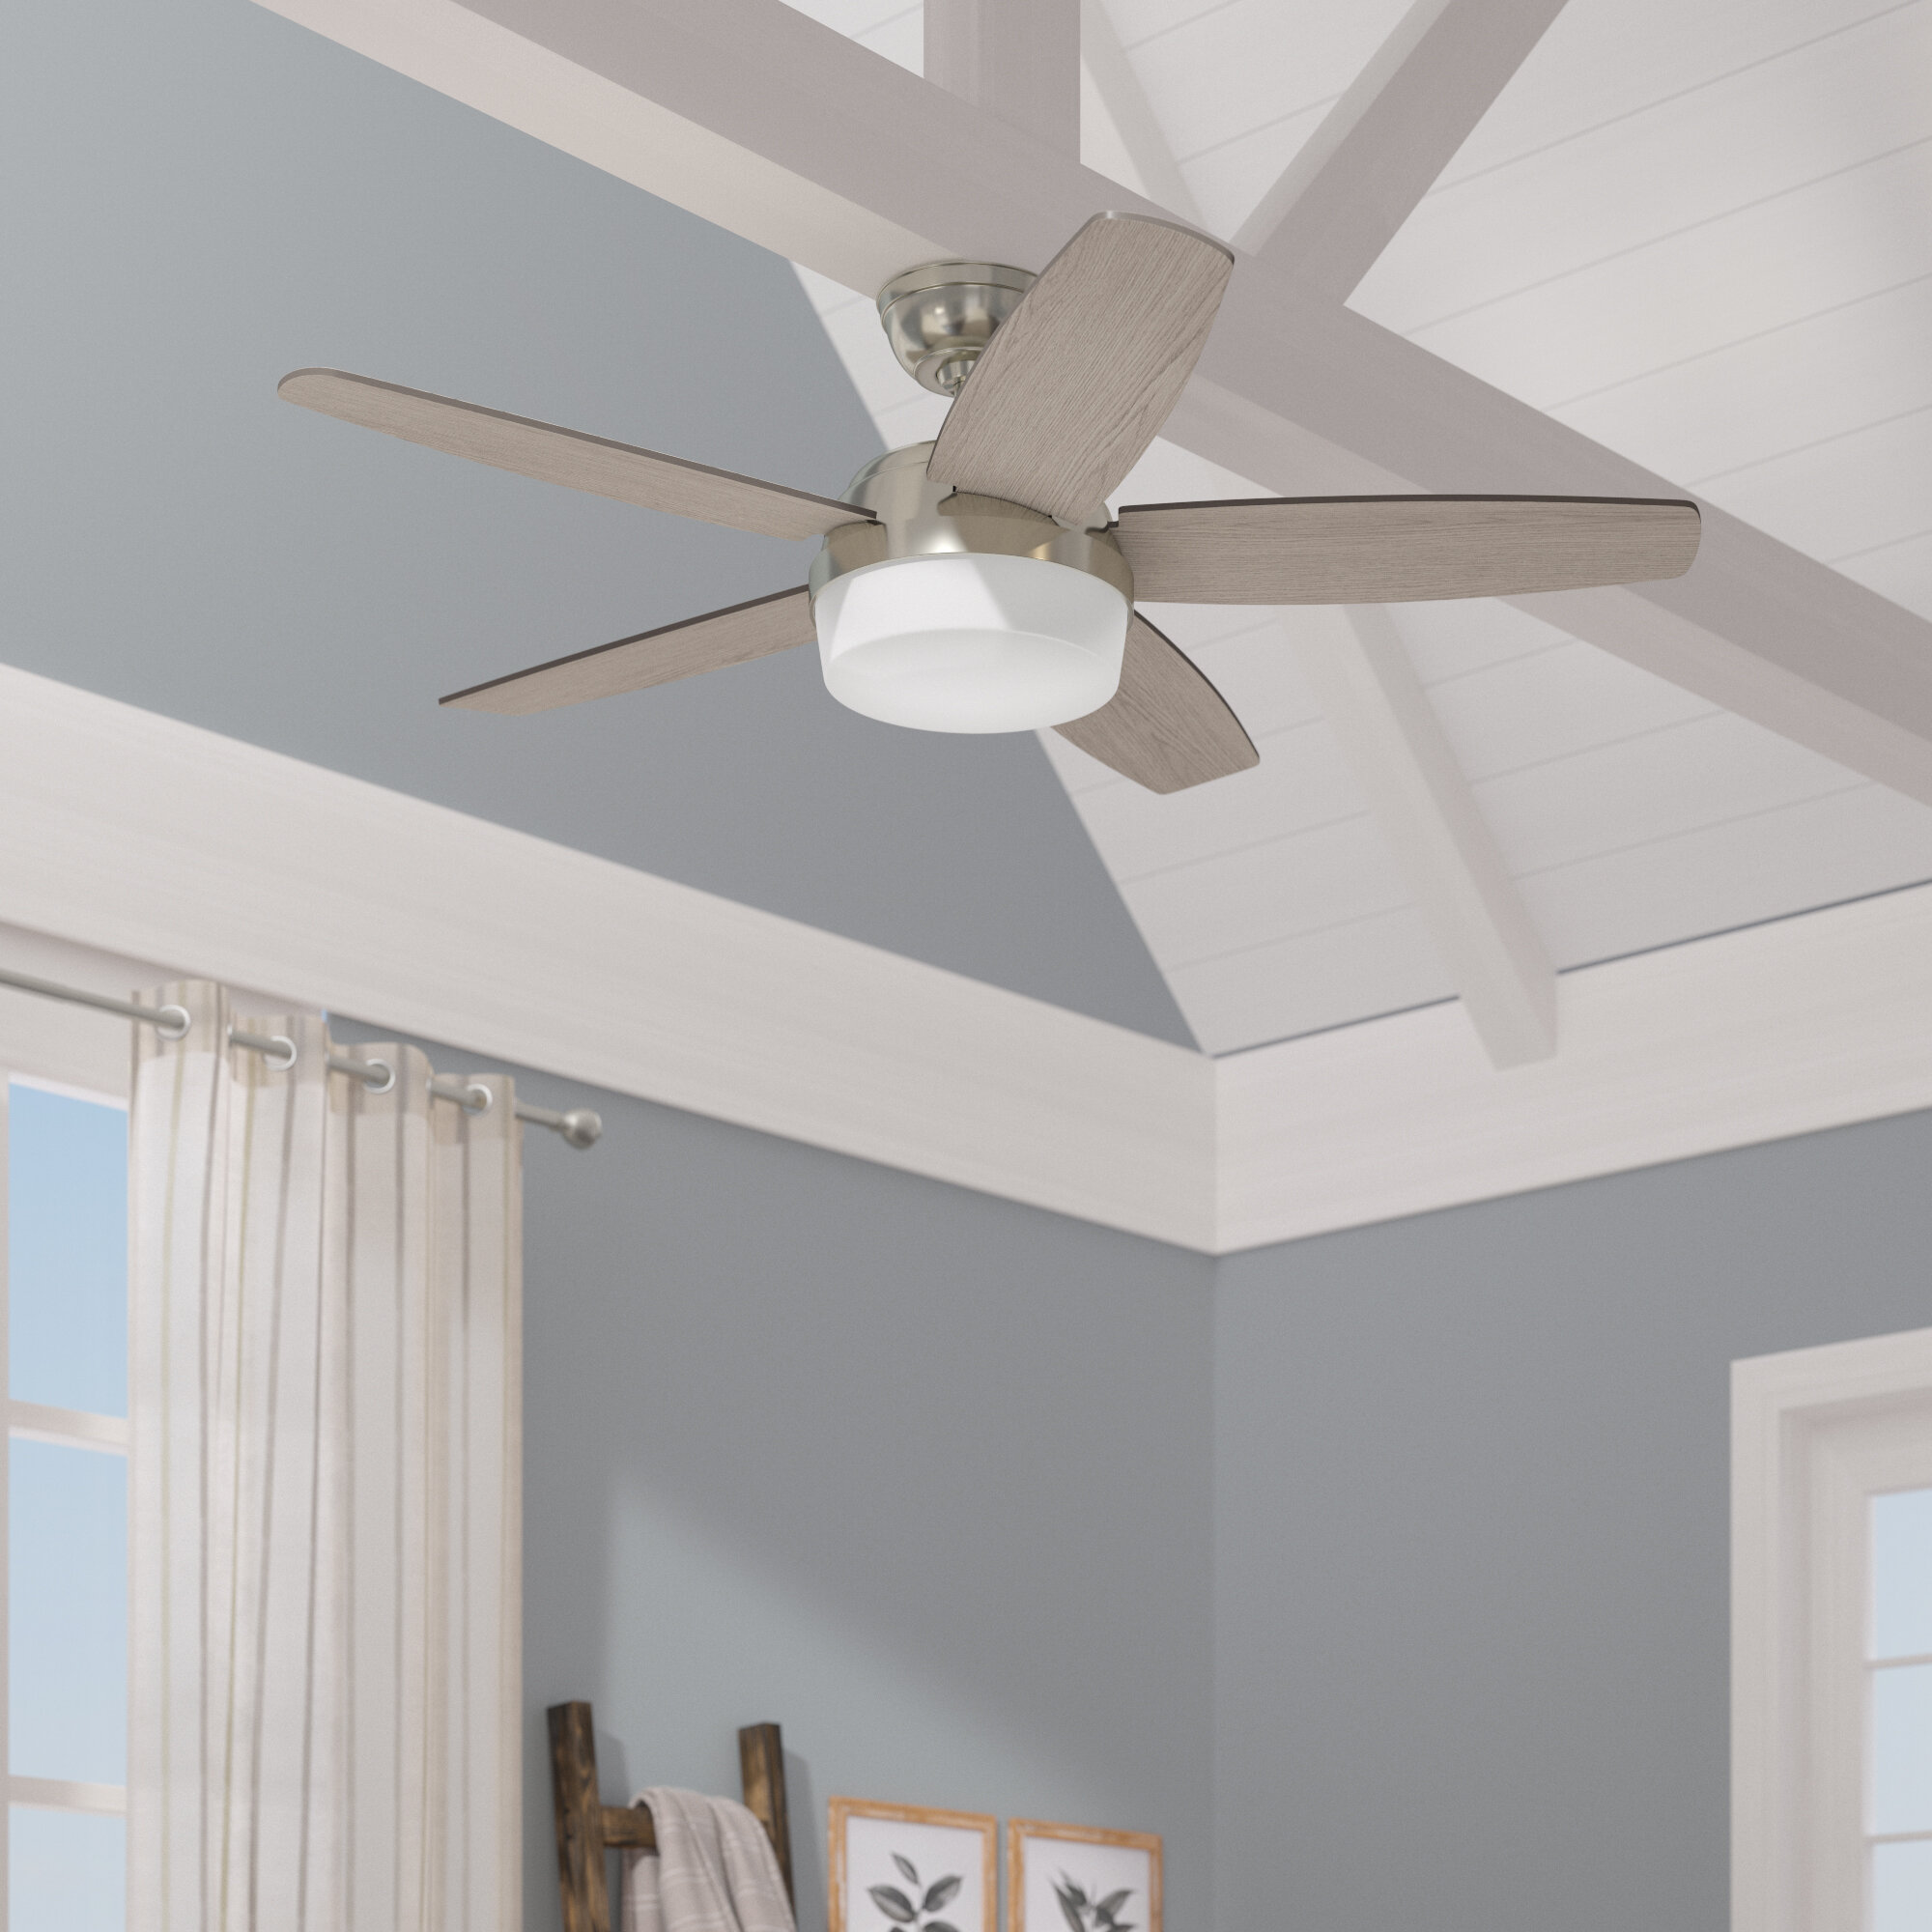 Hunter Fan 52 Avia 5 Blade Led Standard Ceiling Fan With Remote Control And Light Kit Included Reviews Wayfair